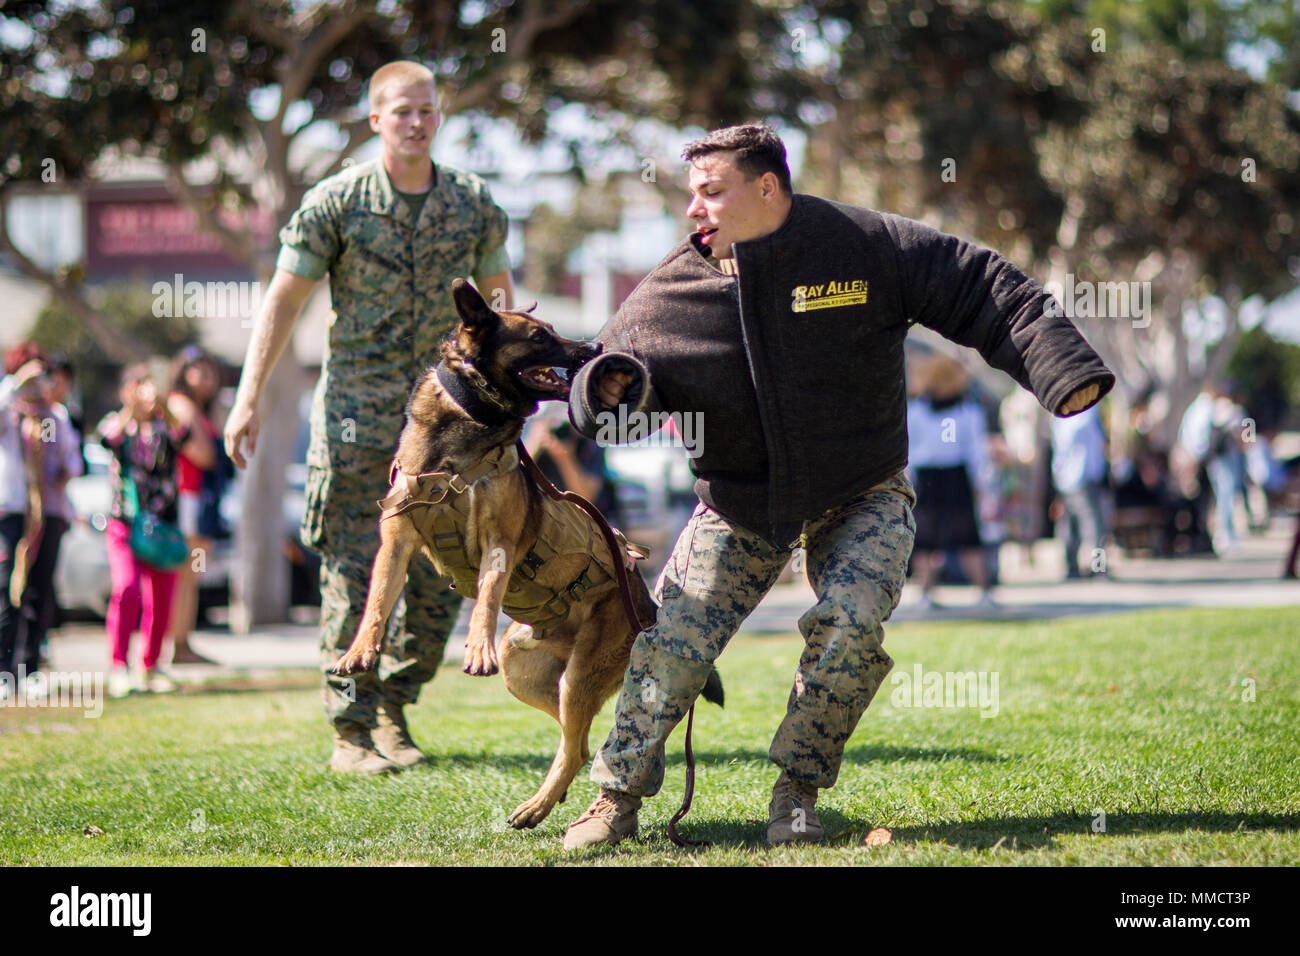 Lance Cpl. Daniel Fenstermacher, with 1st Law Enforcement Battalion, I Marine Expeditionary Force, commands his military working dog Ortis to release the bite gear at Tuna Harbor Park in San Diego, Calif., Oct. 13, 2017 as part of San Diego Fleet Week. The show demonstrated to the public the capabilities of the four-legged professionals in military occupations. (U.S. Marine Corps photo by Lance Cpl. Gabino Perez) Stock Photo